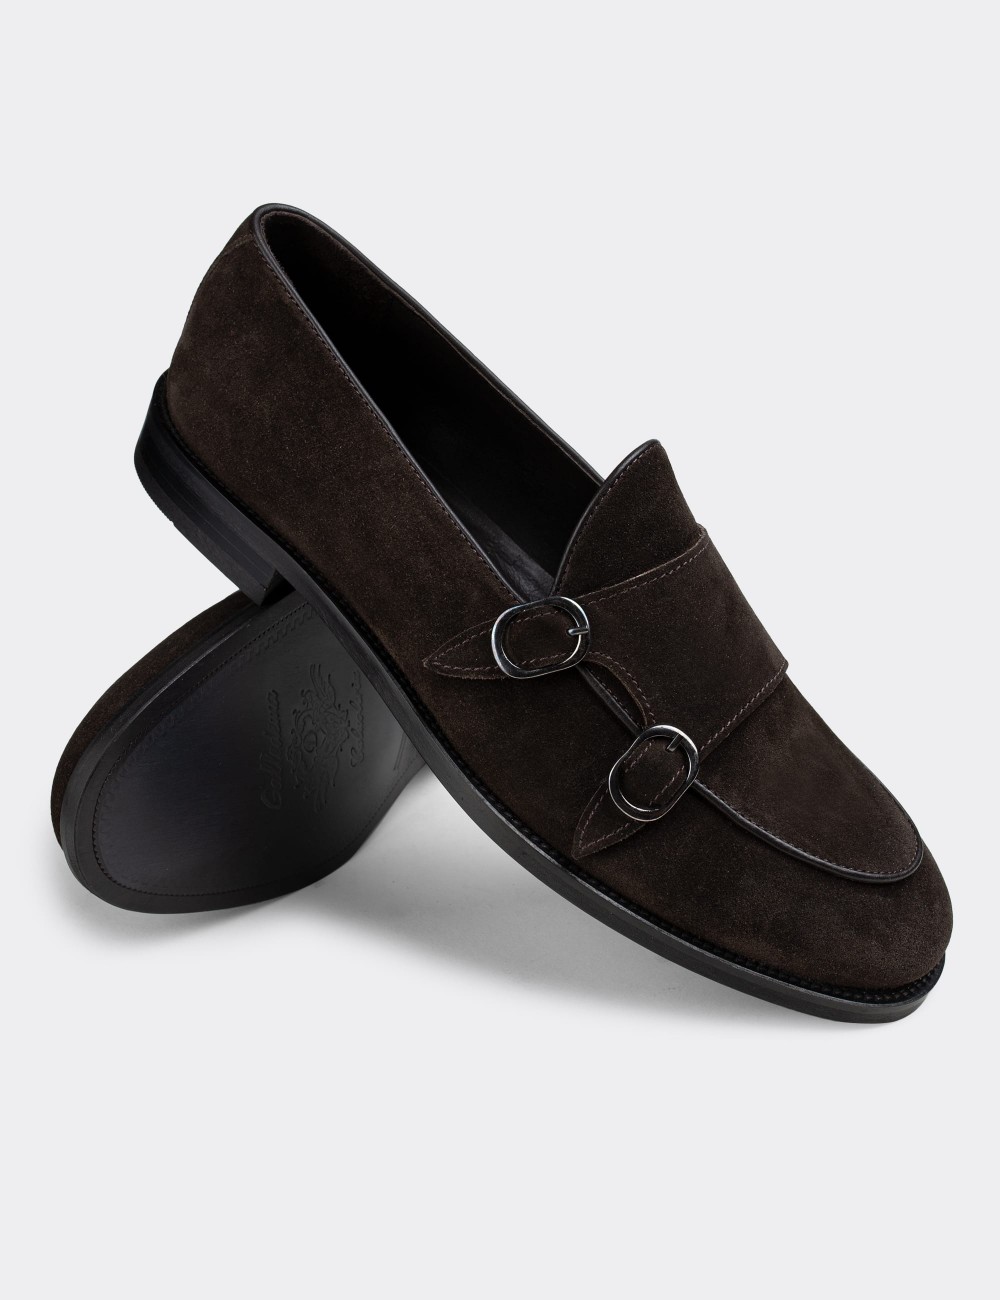 Brown Suede Leather Double Monk-Strap Loafers - 01844MKHVN01